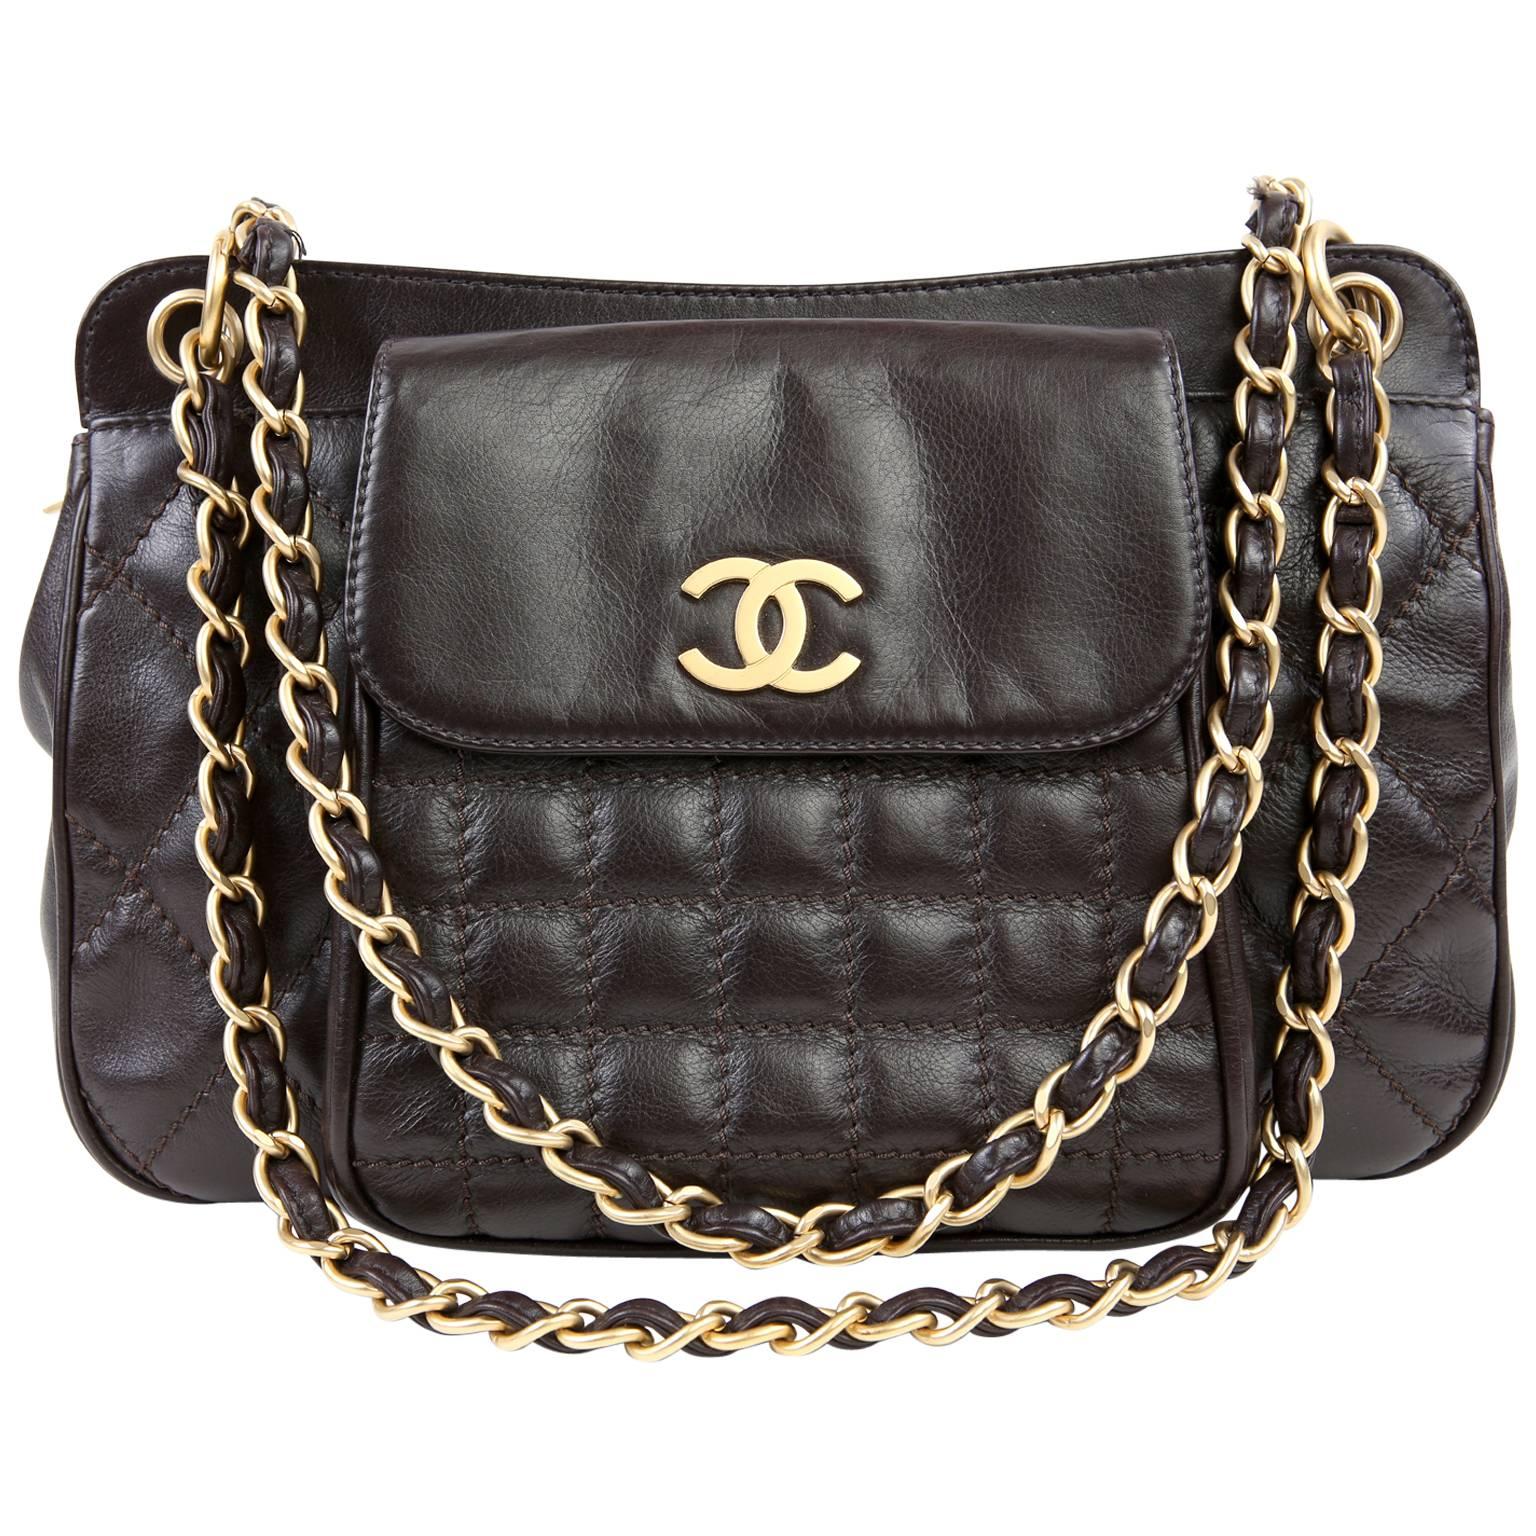 Chanel Dark Brown Leather Quilted Pocket Tote Bag For Sale